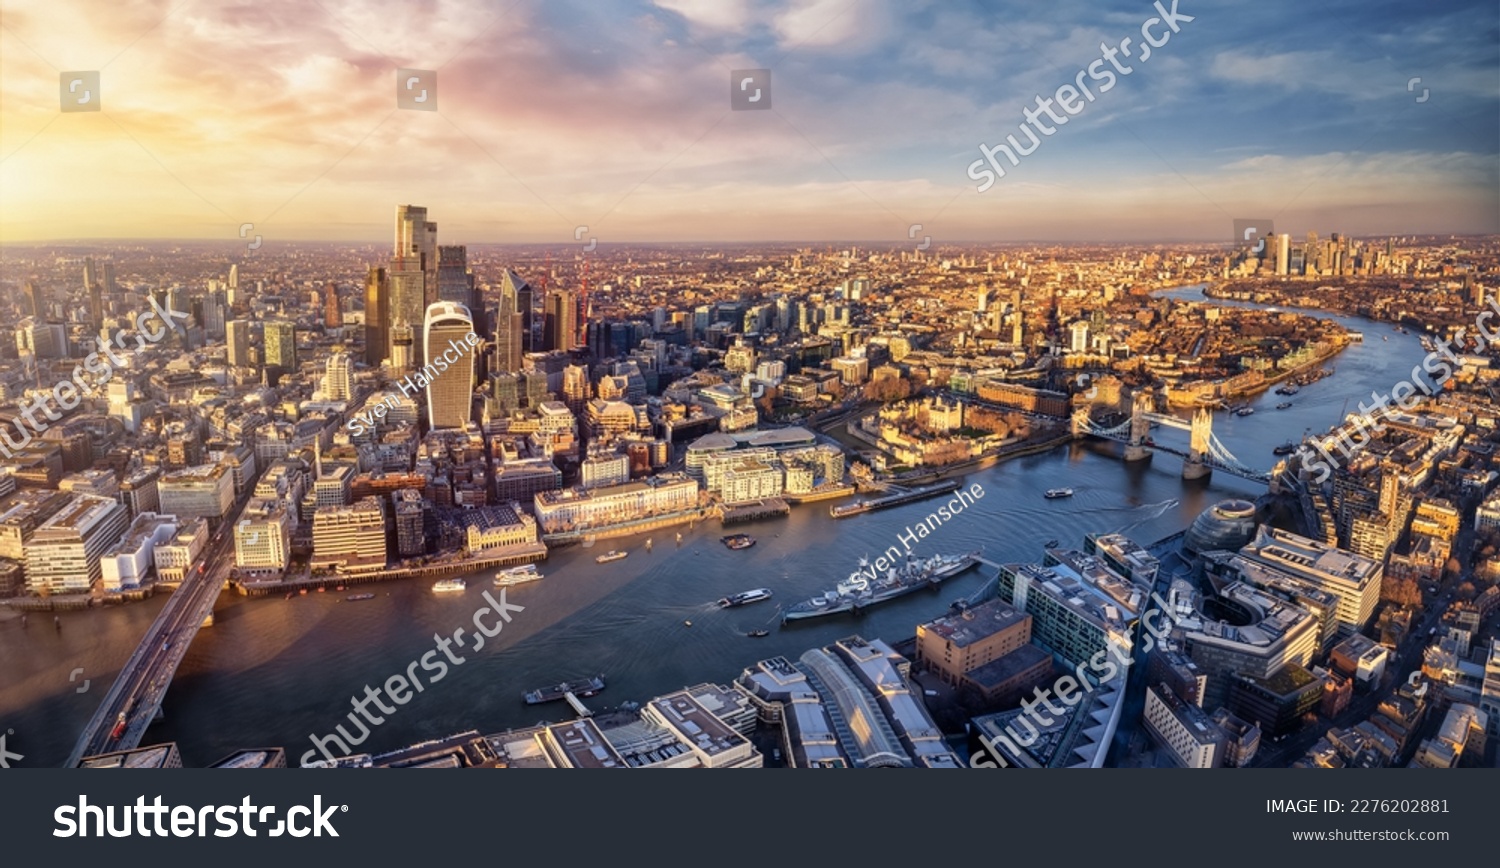 Panoramic sunset view over the skyline of the City of London, England, down the River Thames with Tower Bridge and Canary Wharf district #2276202881